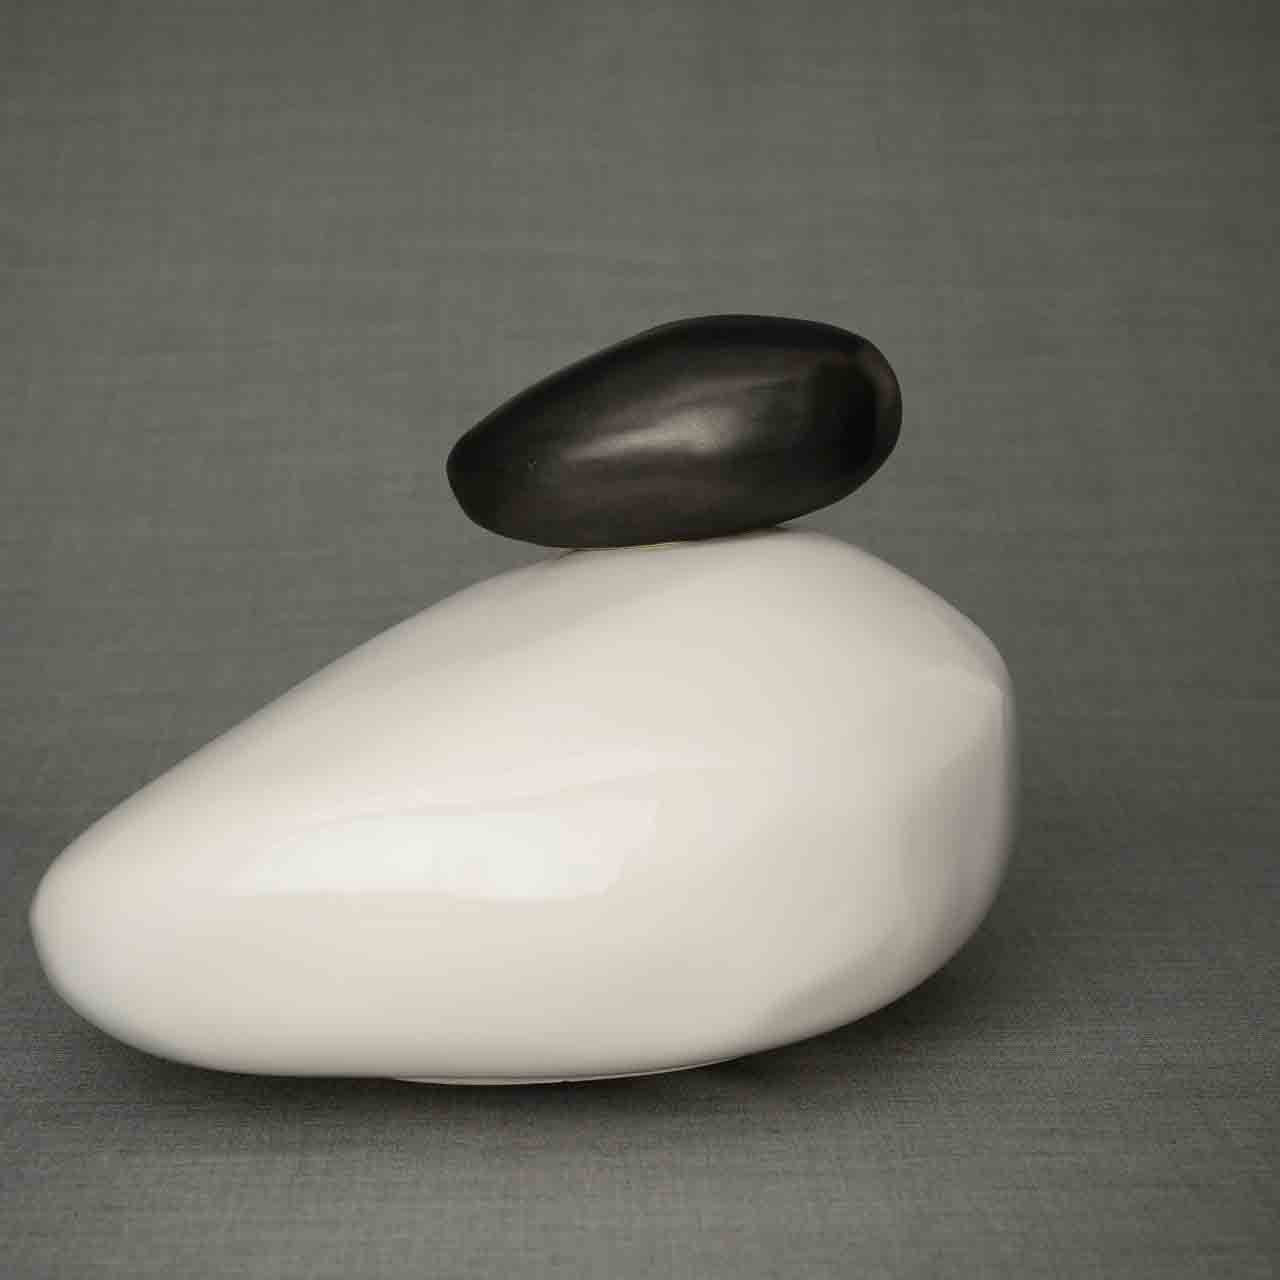 Pebbles Cremation Urn for Ashes in White and Matte Black Dark Background